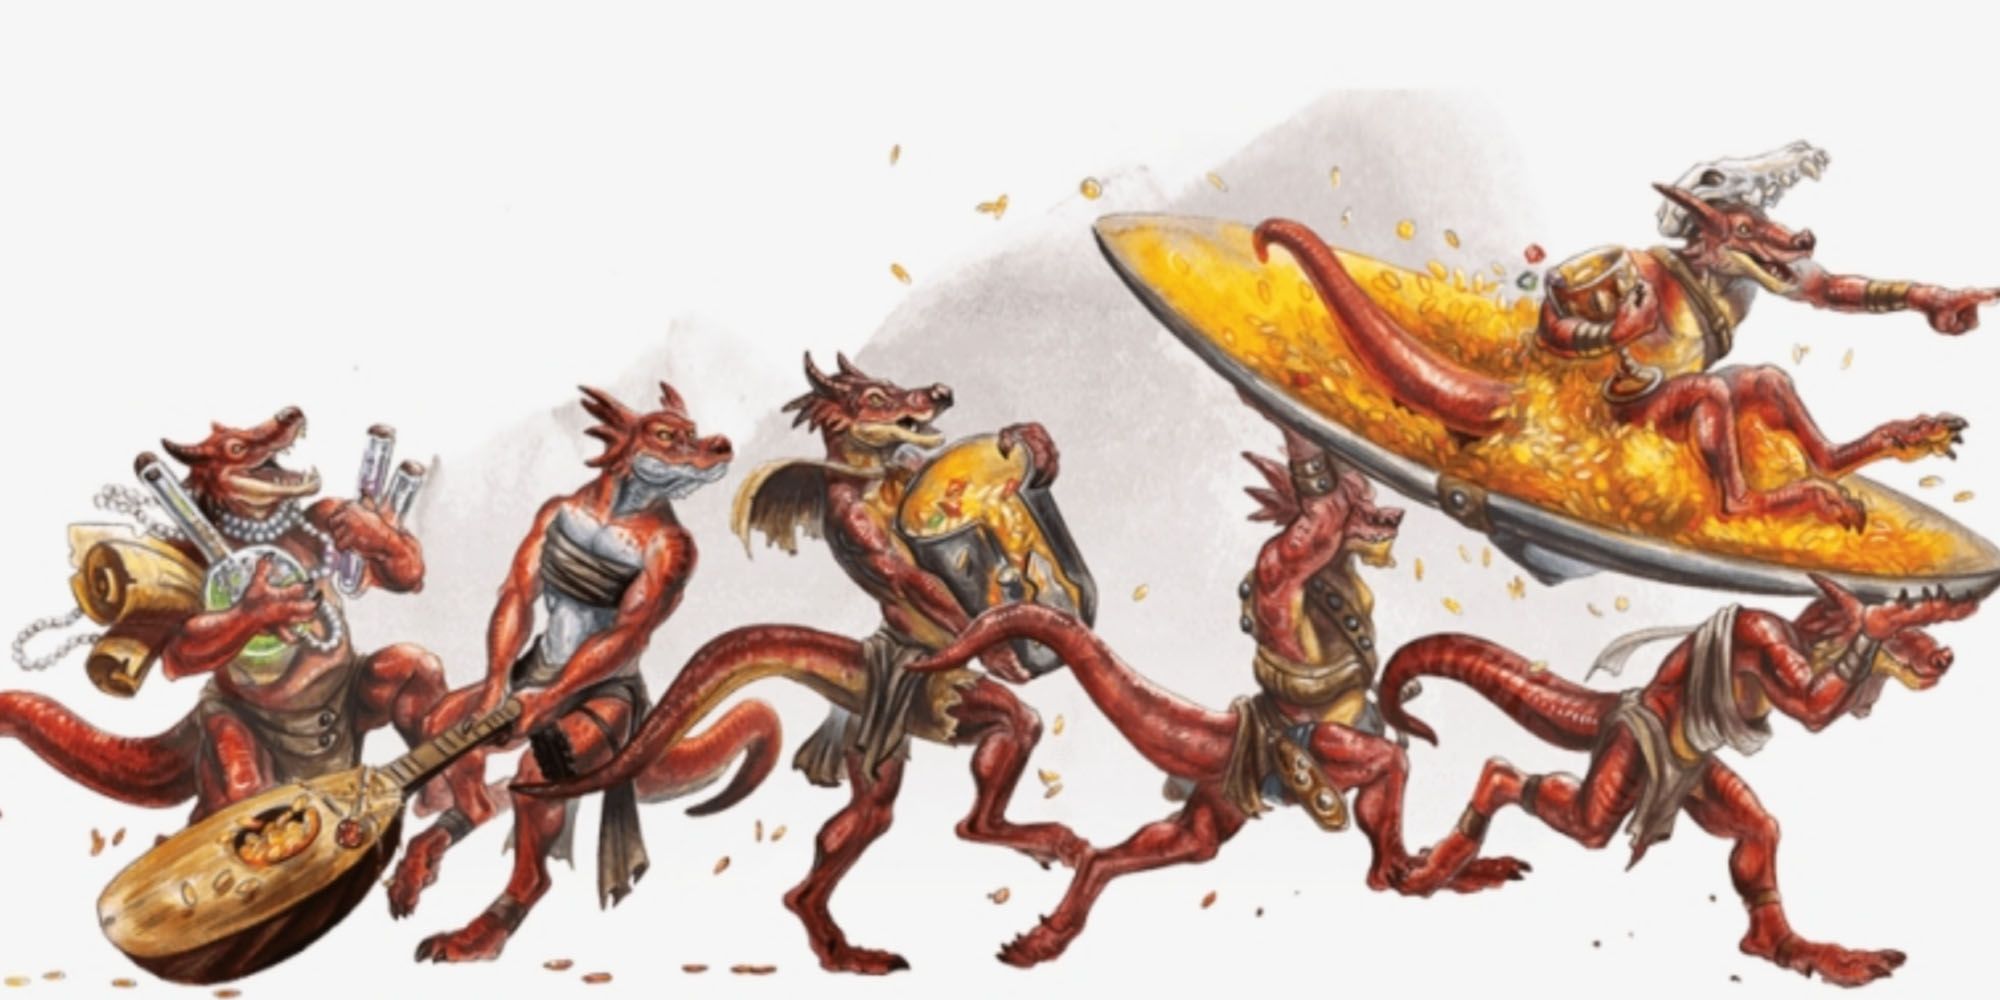 A travelling party of Kobolds in DnD 5e.